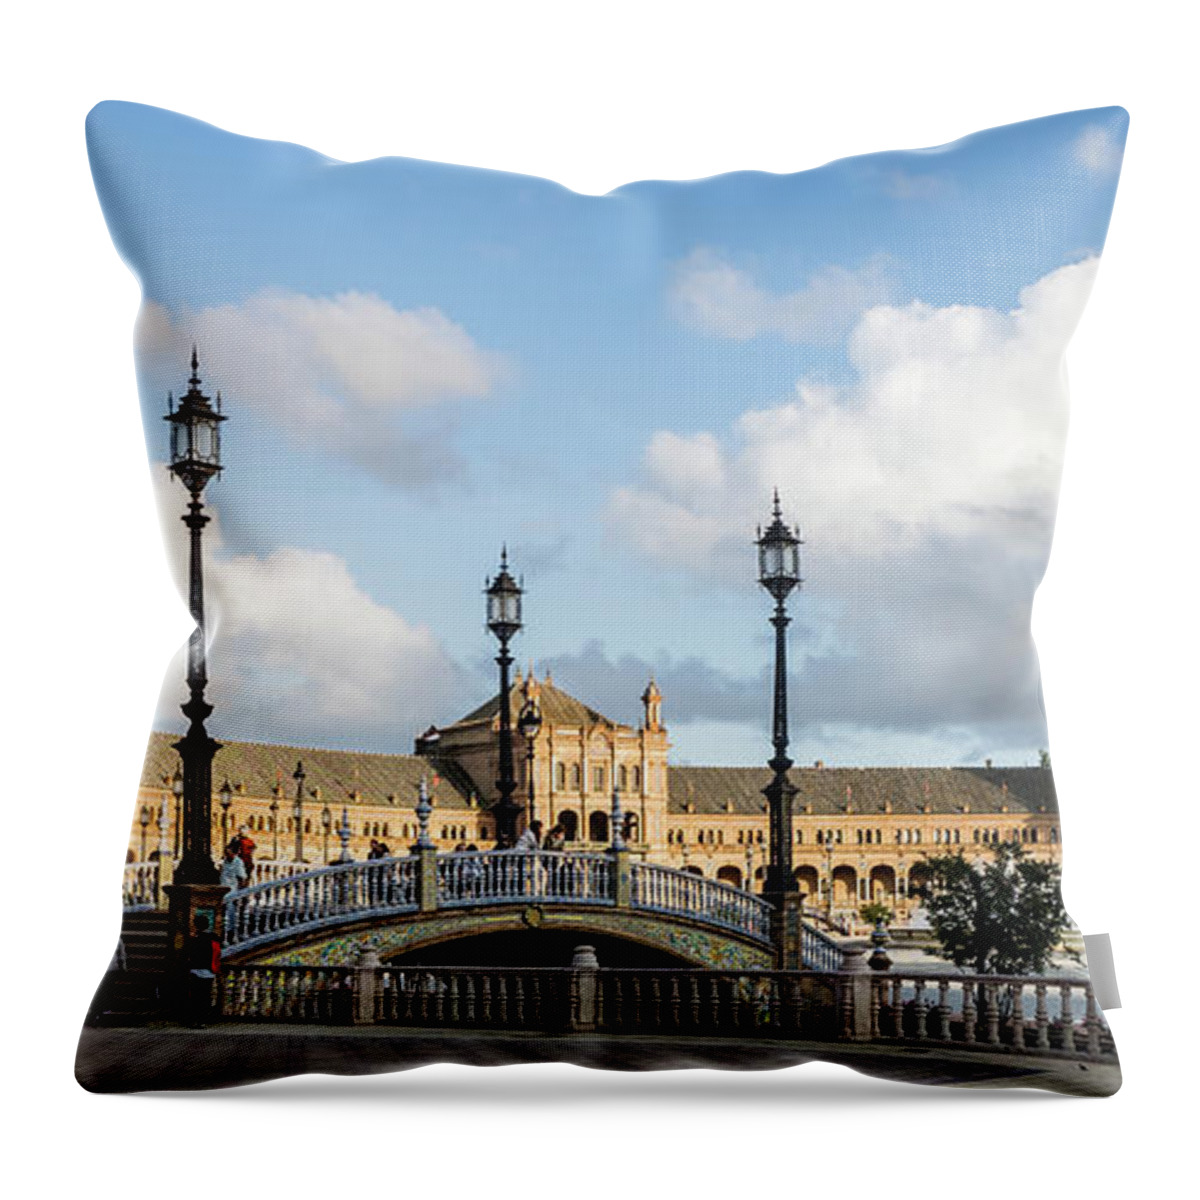 Andalucia Throw Pillow featuring the photograph Architectural marvel by Usha Peddamatham